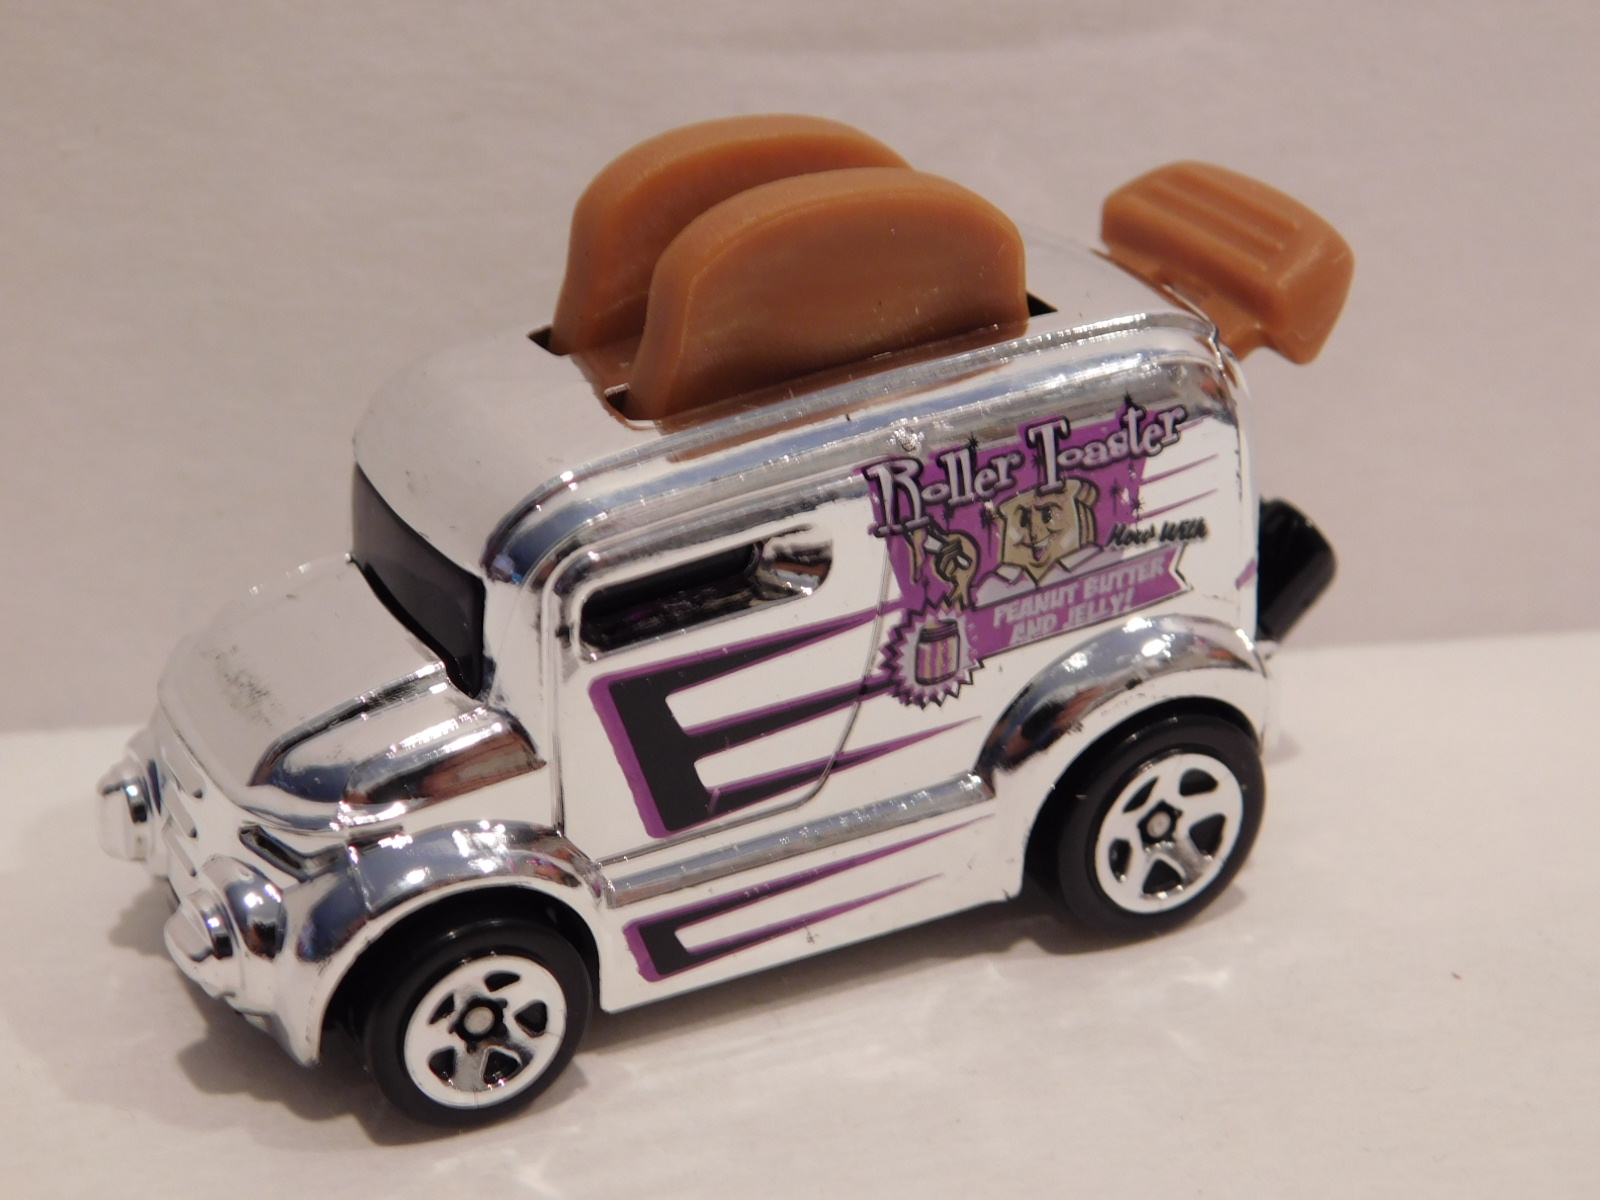 HOT WHEELS ROLLER TOASTER EXPERIMOTORS #1/10 GOLD DIECAST 1:64 SCALE MUST SEE! 